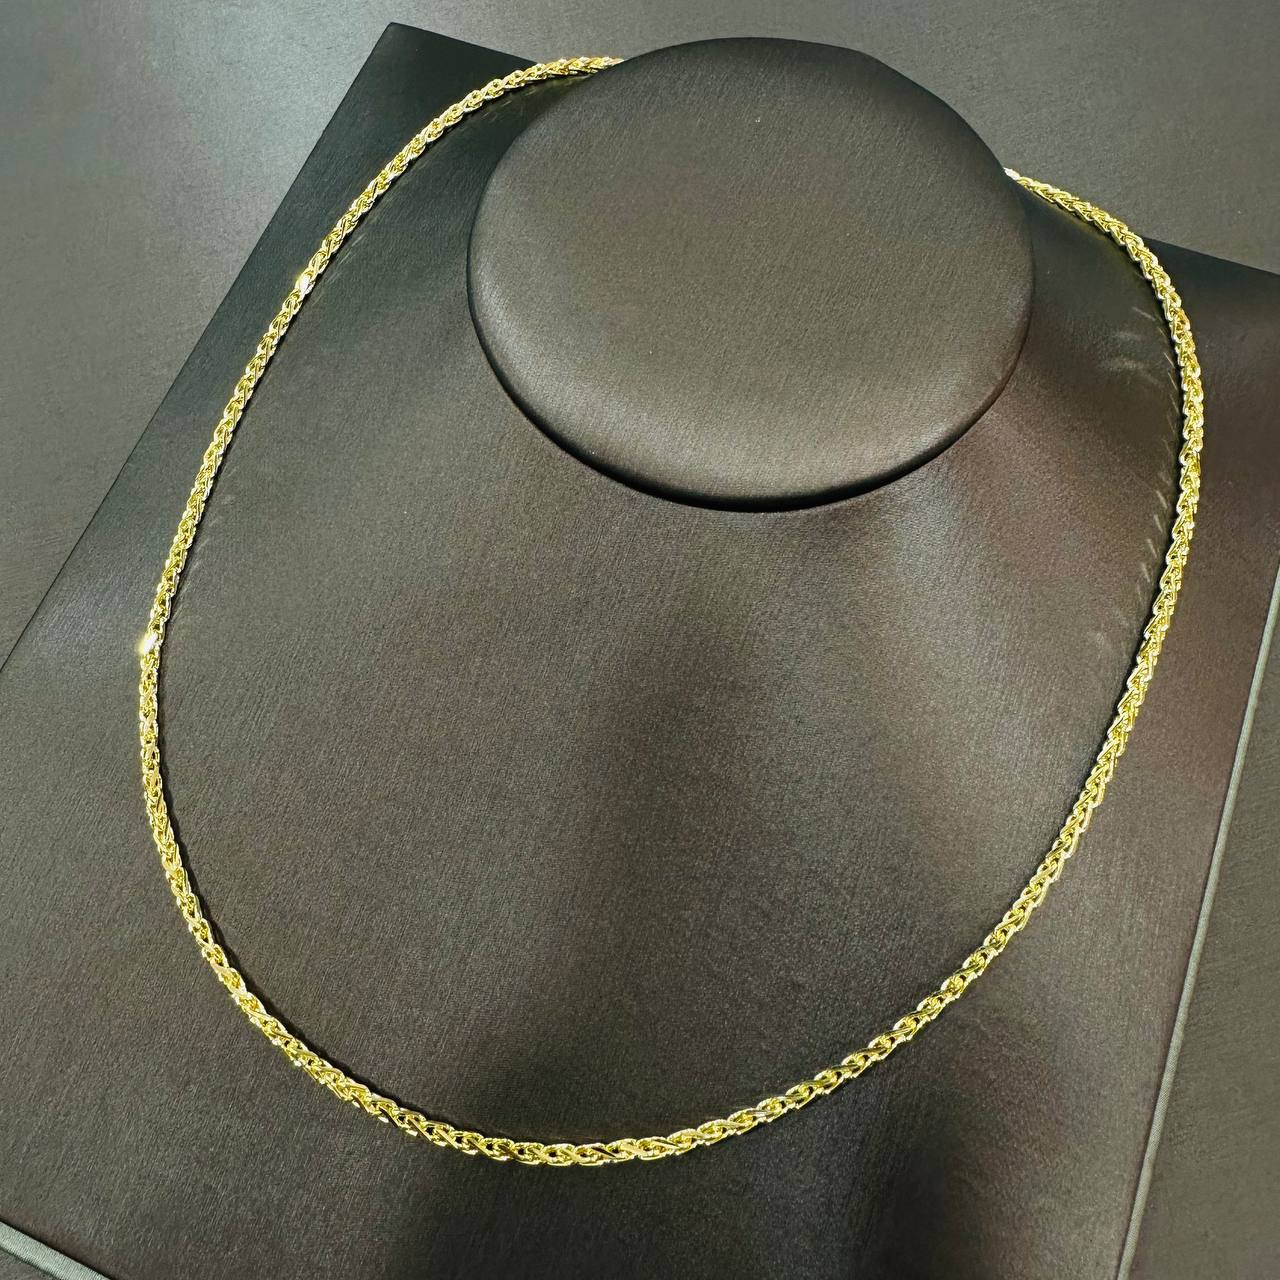 22k / 916 Gold Spike Necklace / Chain-916 gold-Best Gold Shop